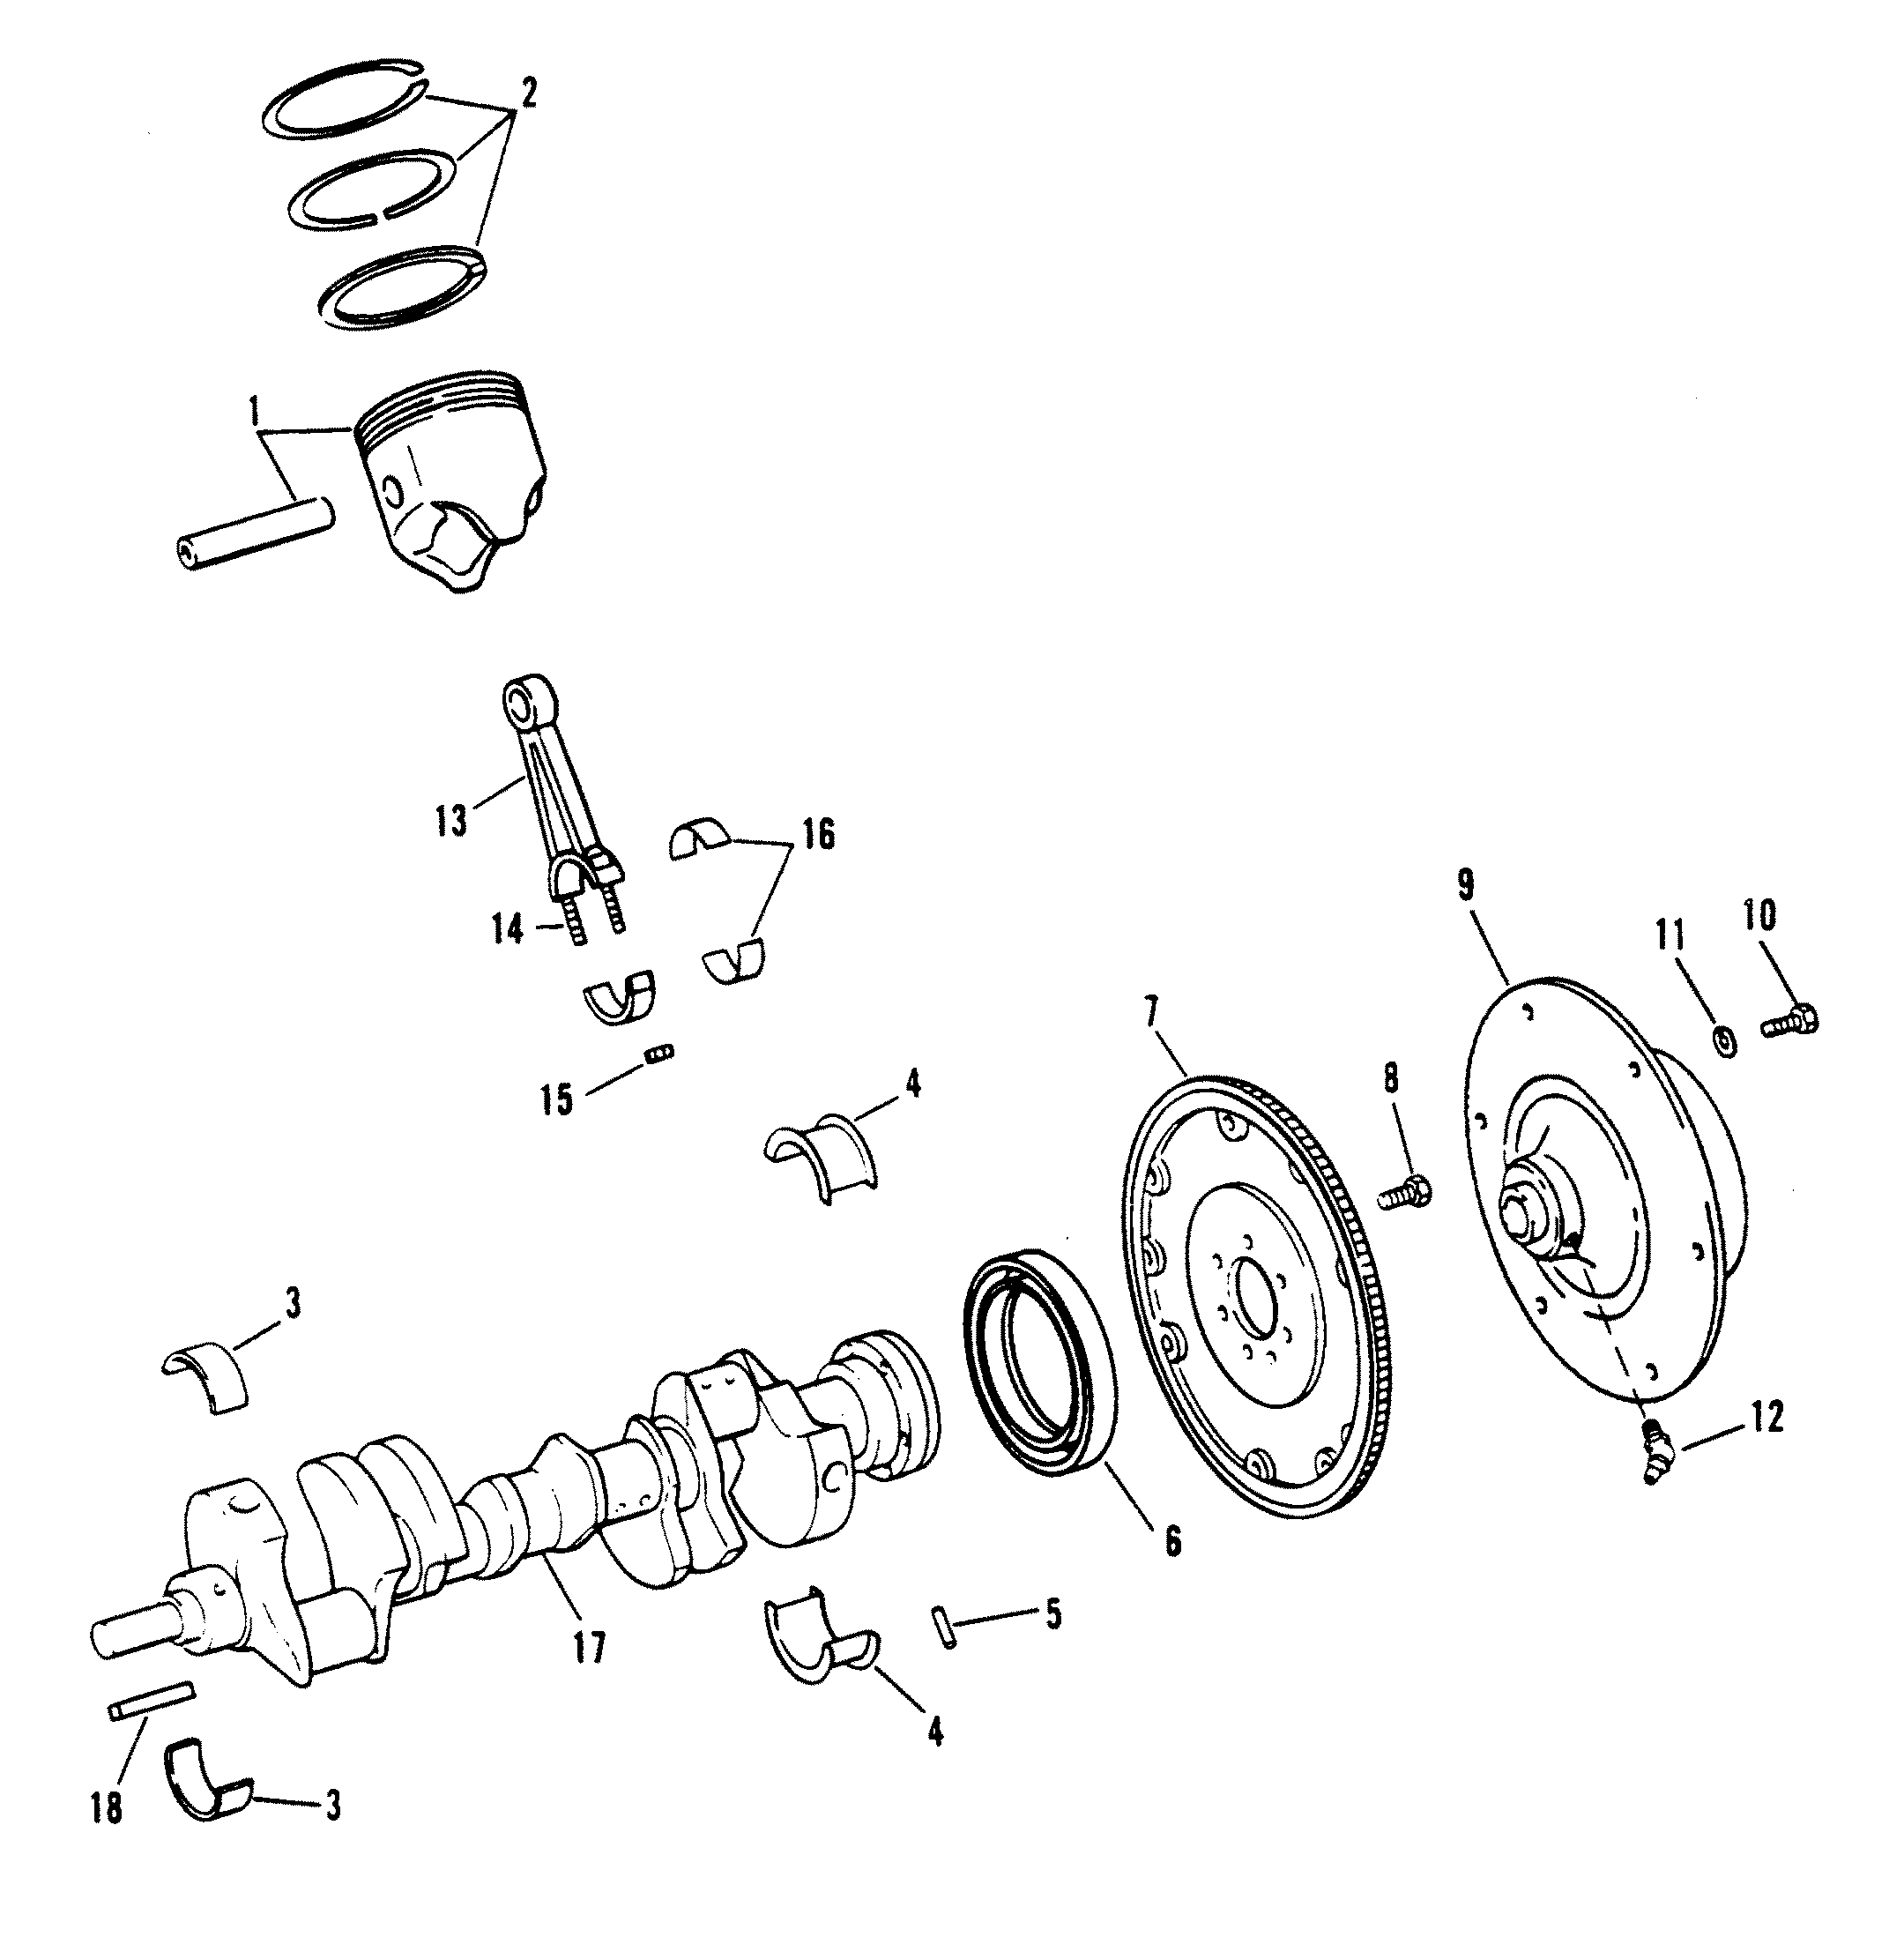 CRANKSHAFT, PISTONS, AND CONNECTING RODS